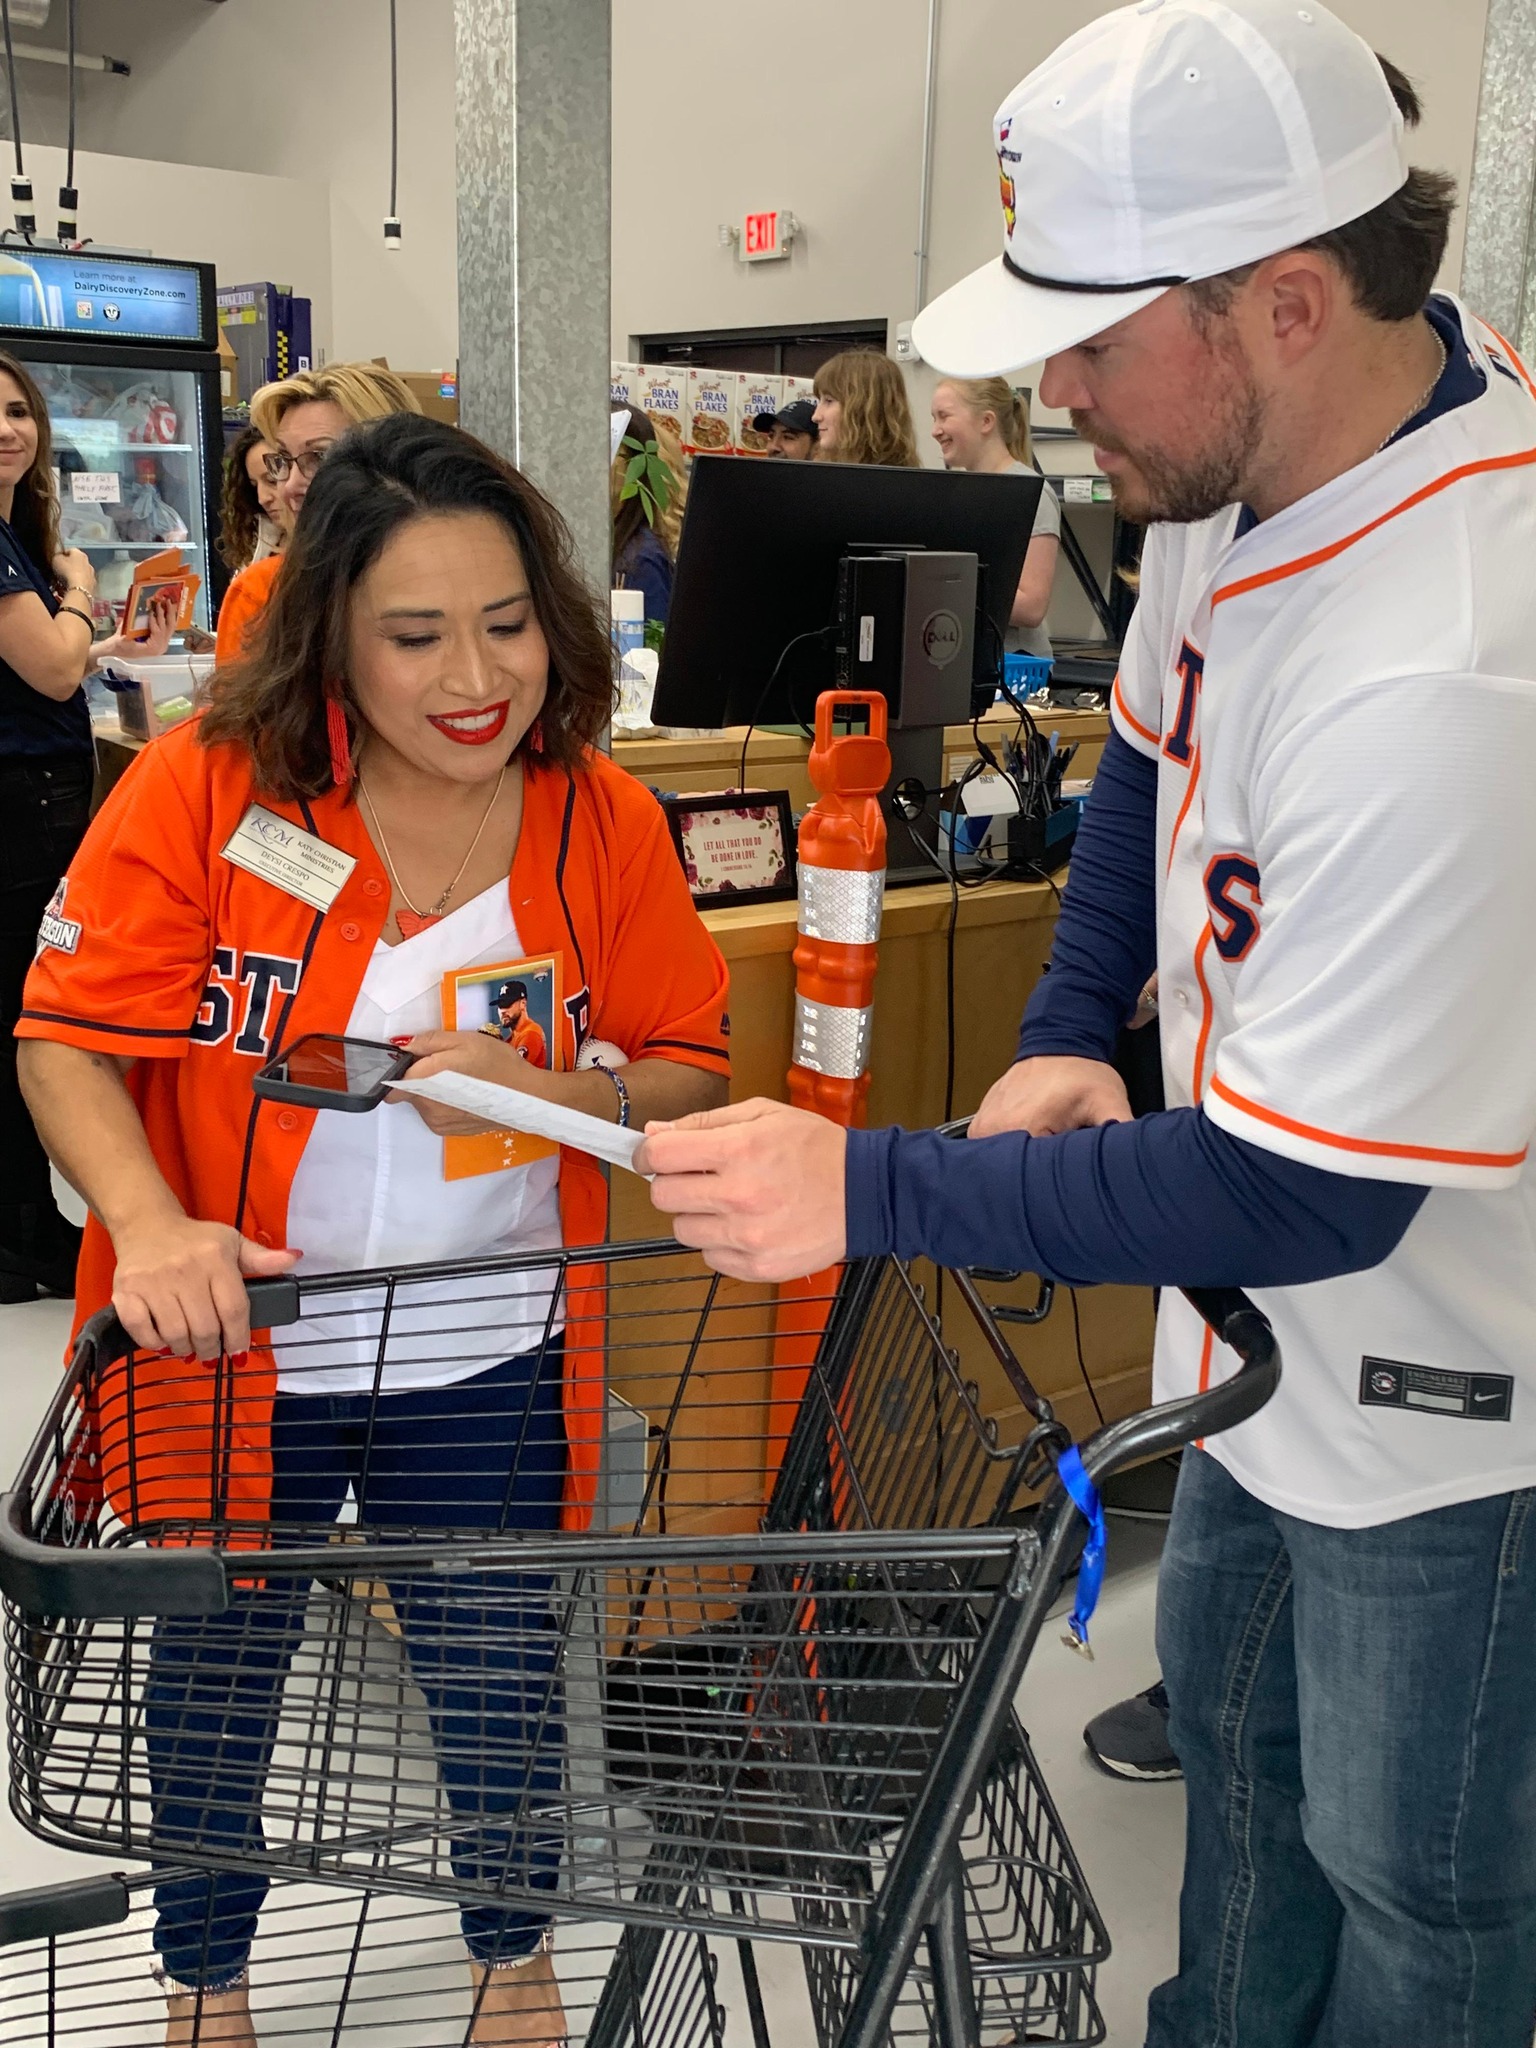 Houston Astros players shop with kids at Academy during Astros-Caravan stop